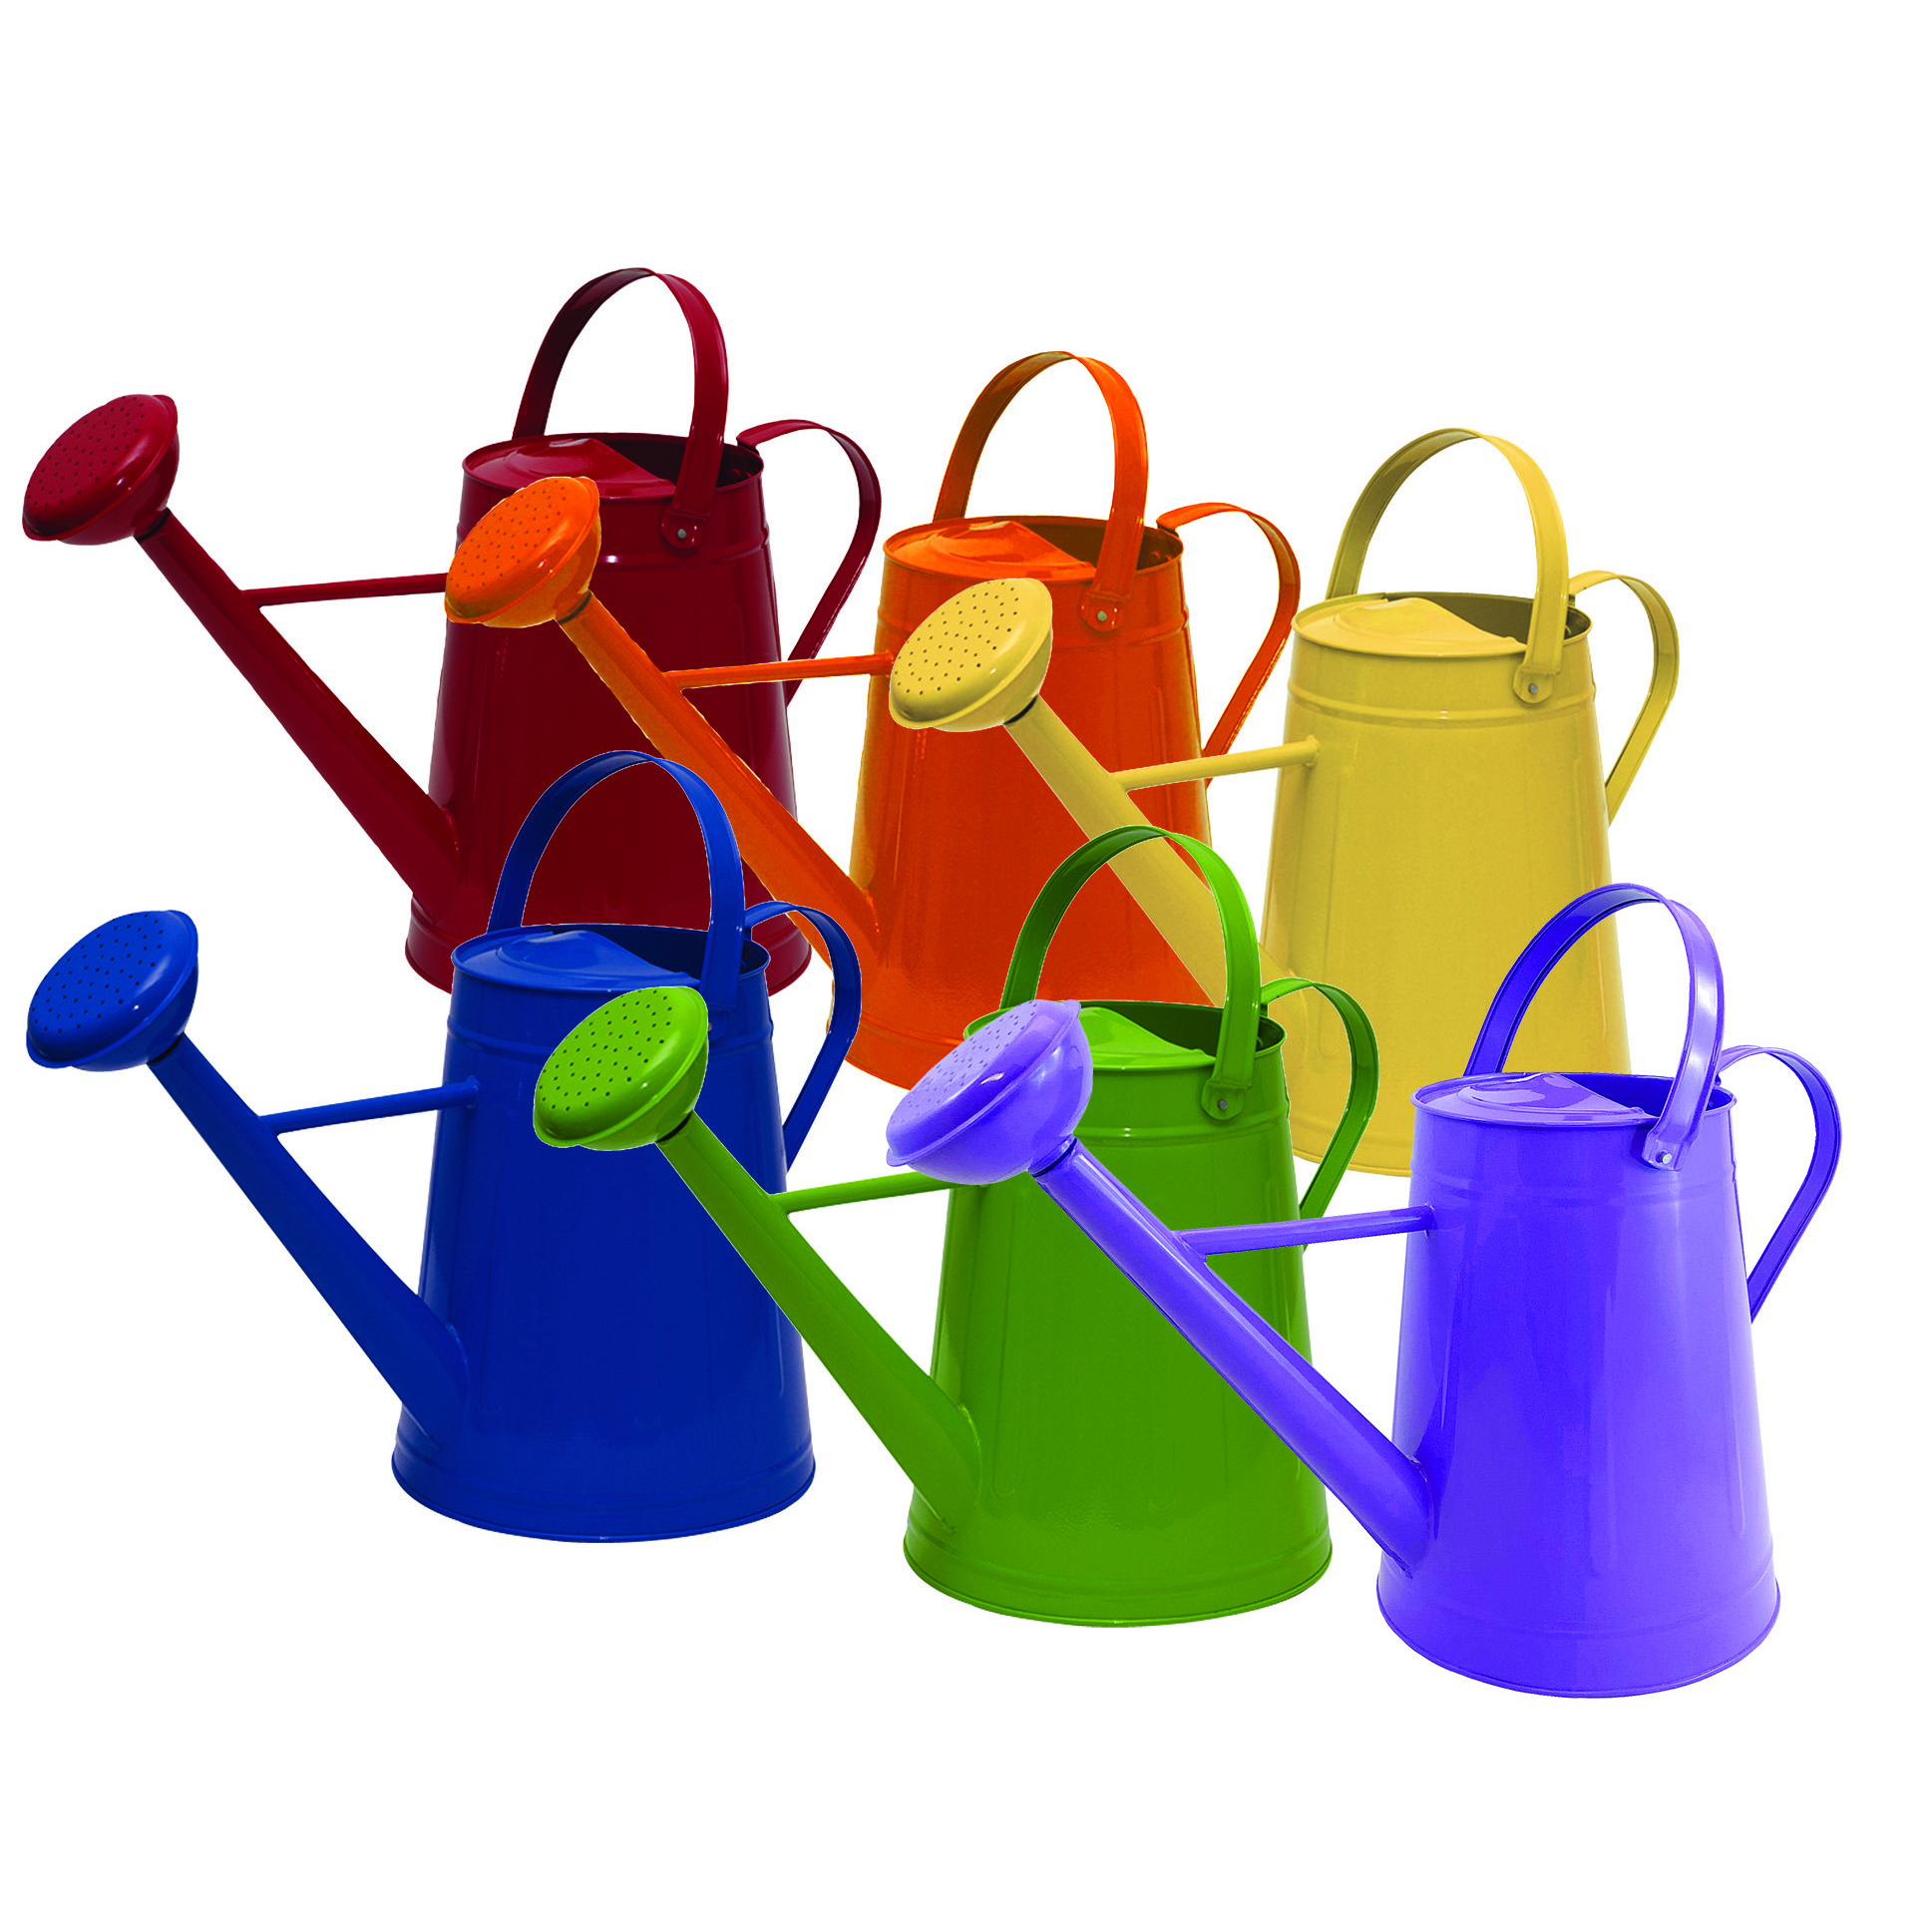 2.1g Mixed Metal Watering Can